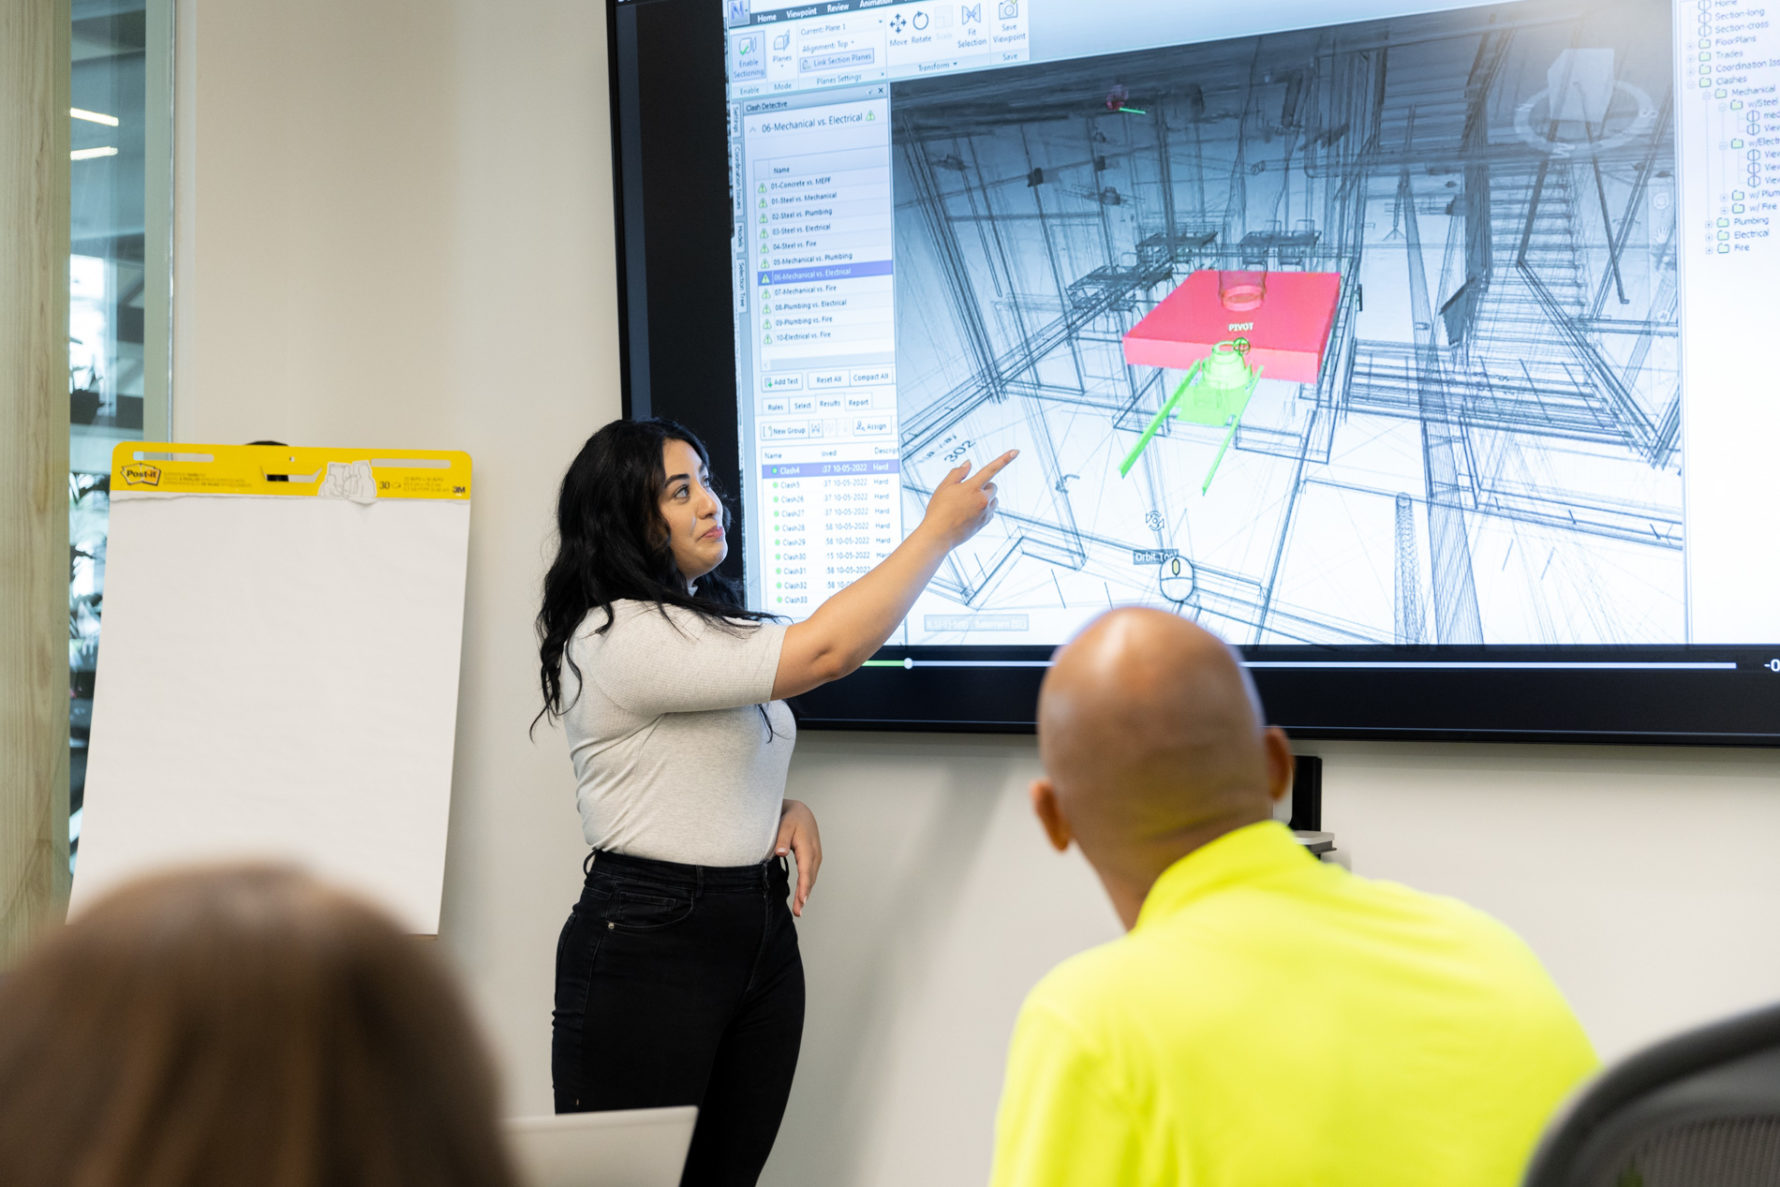 A McCownGordon Construction associate pointing at plans on a screen during a meeting in the office